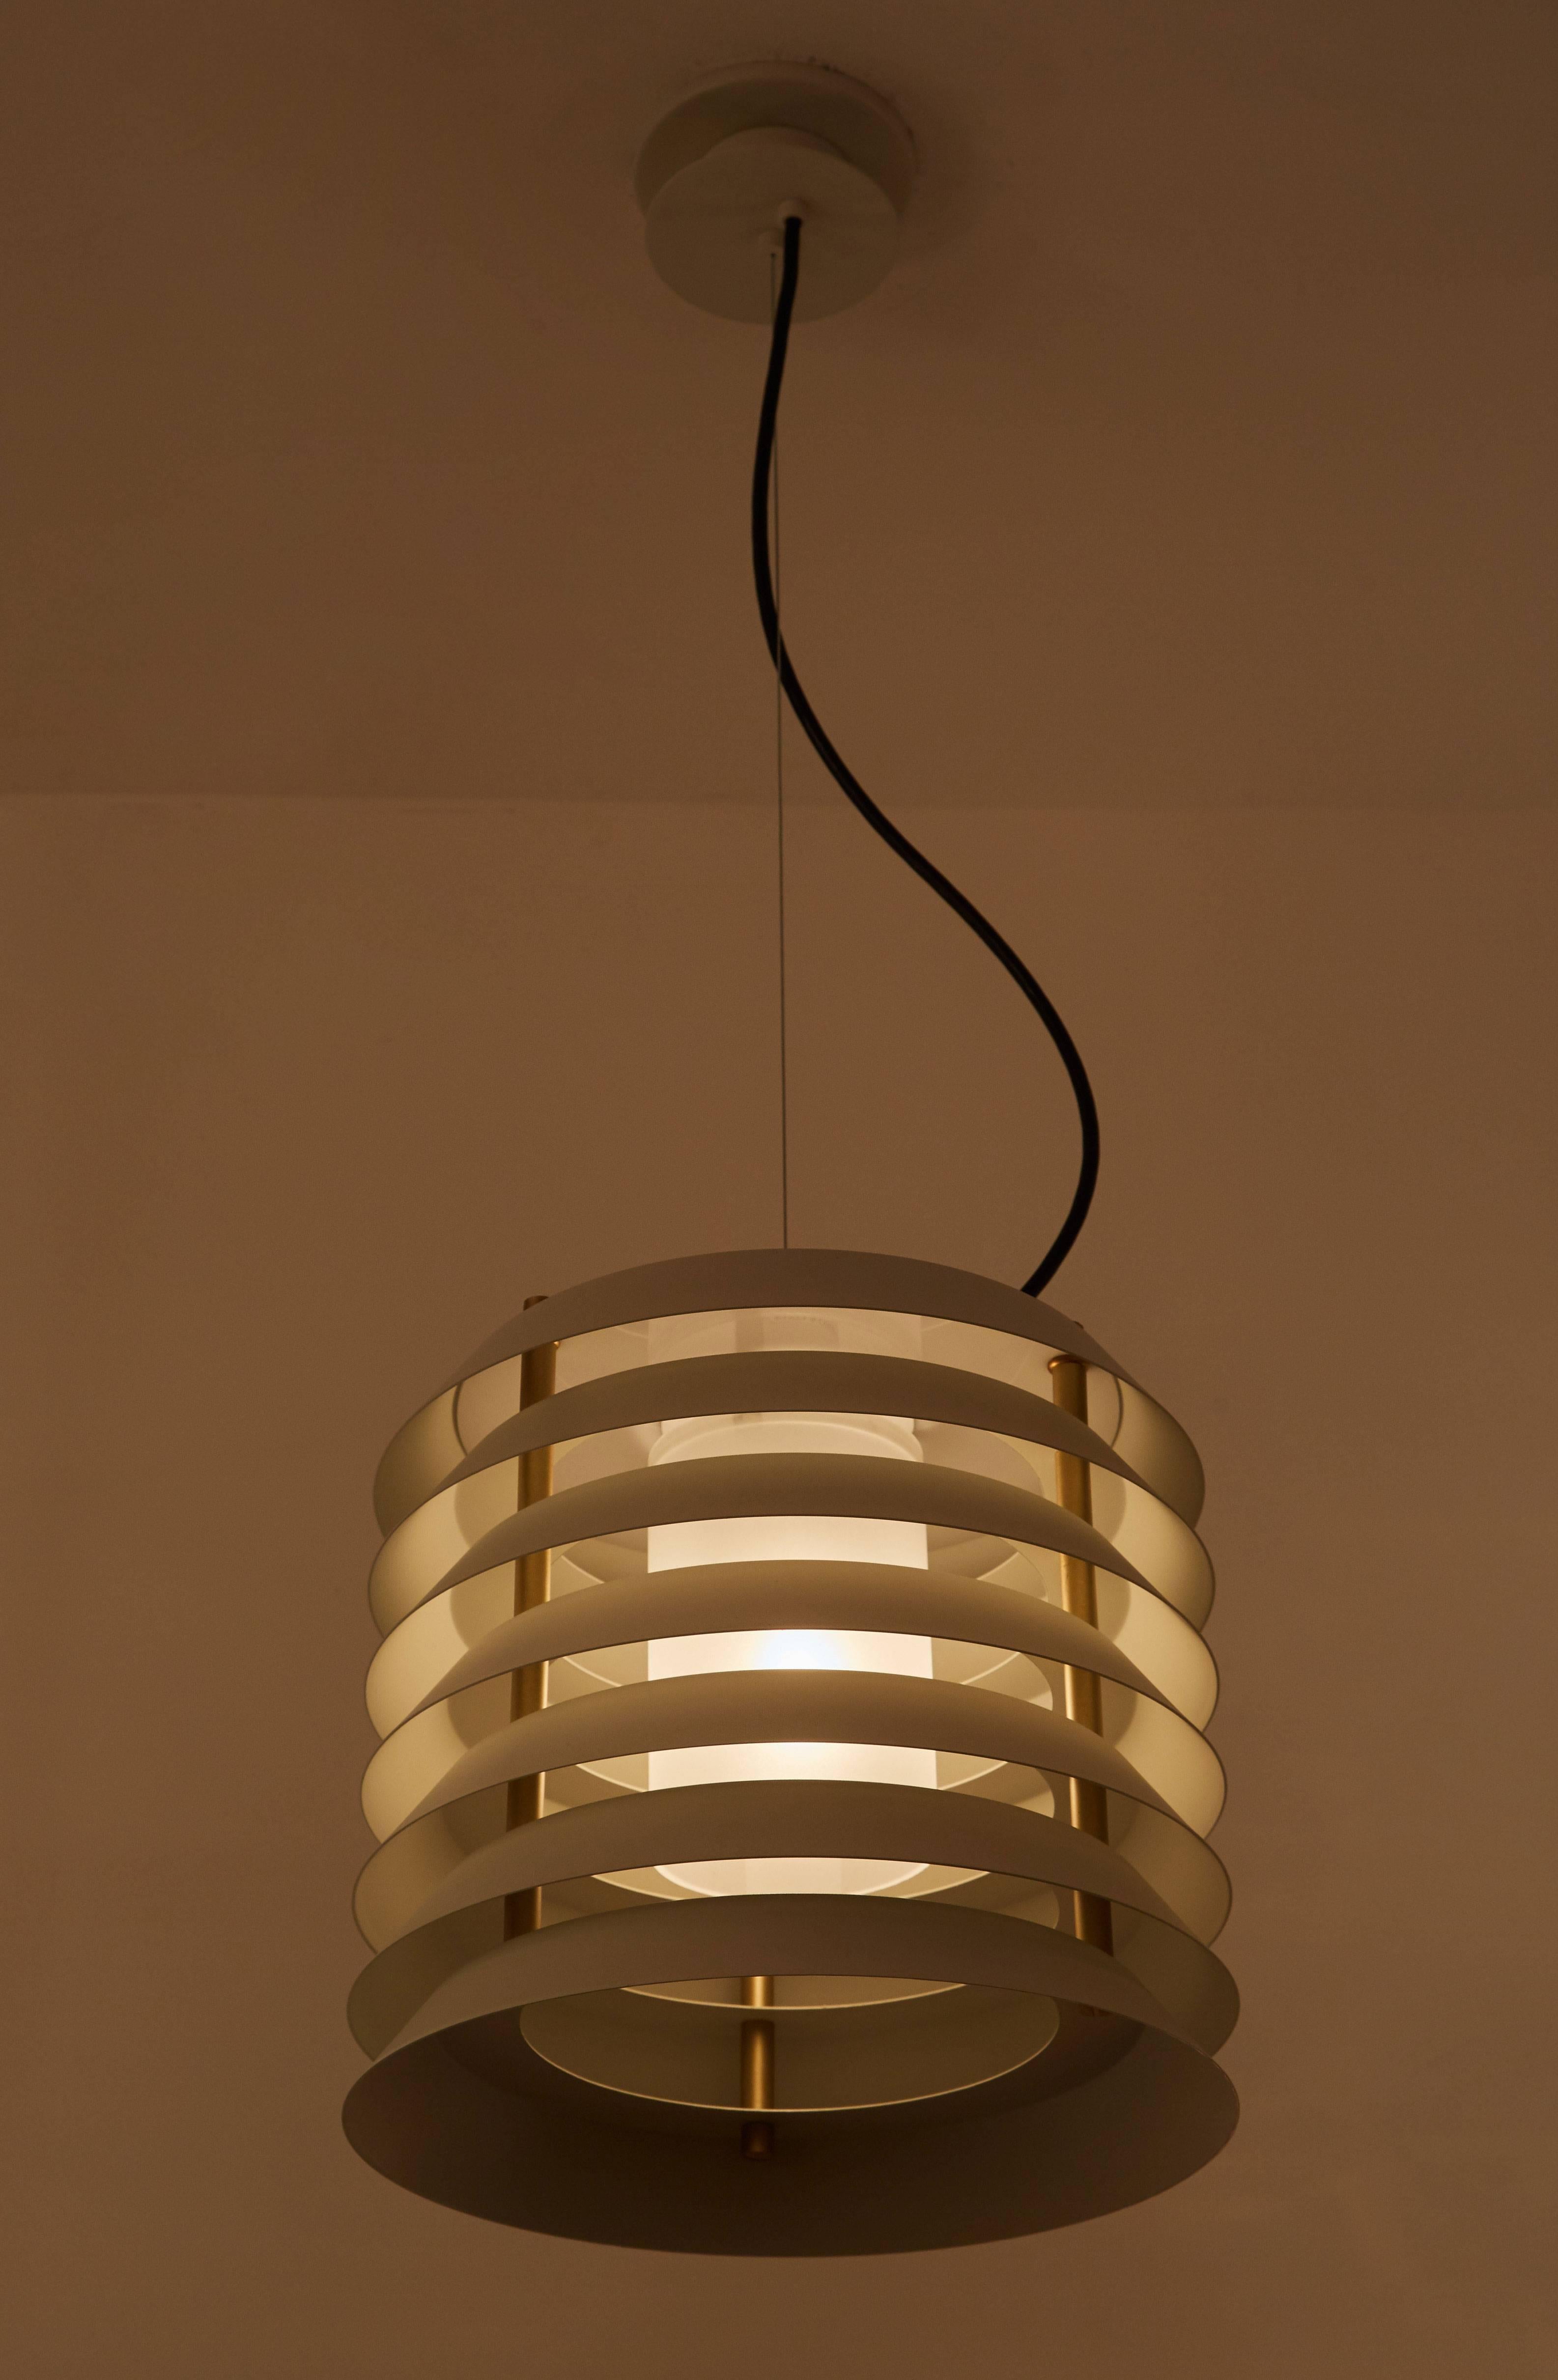 Maija pendant light originally designed by Ilmari Tapiovaara for Santa & Cole in 1955. Made from a column of small matte white superimposed metal discs joined by brass hardware. Diffuser in white translucent engineering plastic.
Dimmer included.